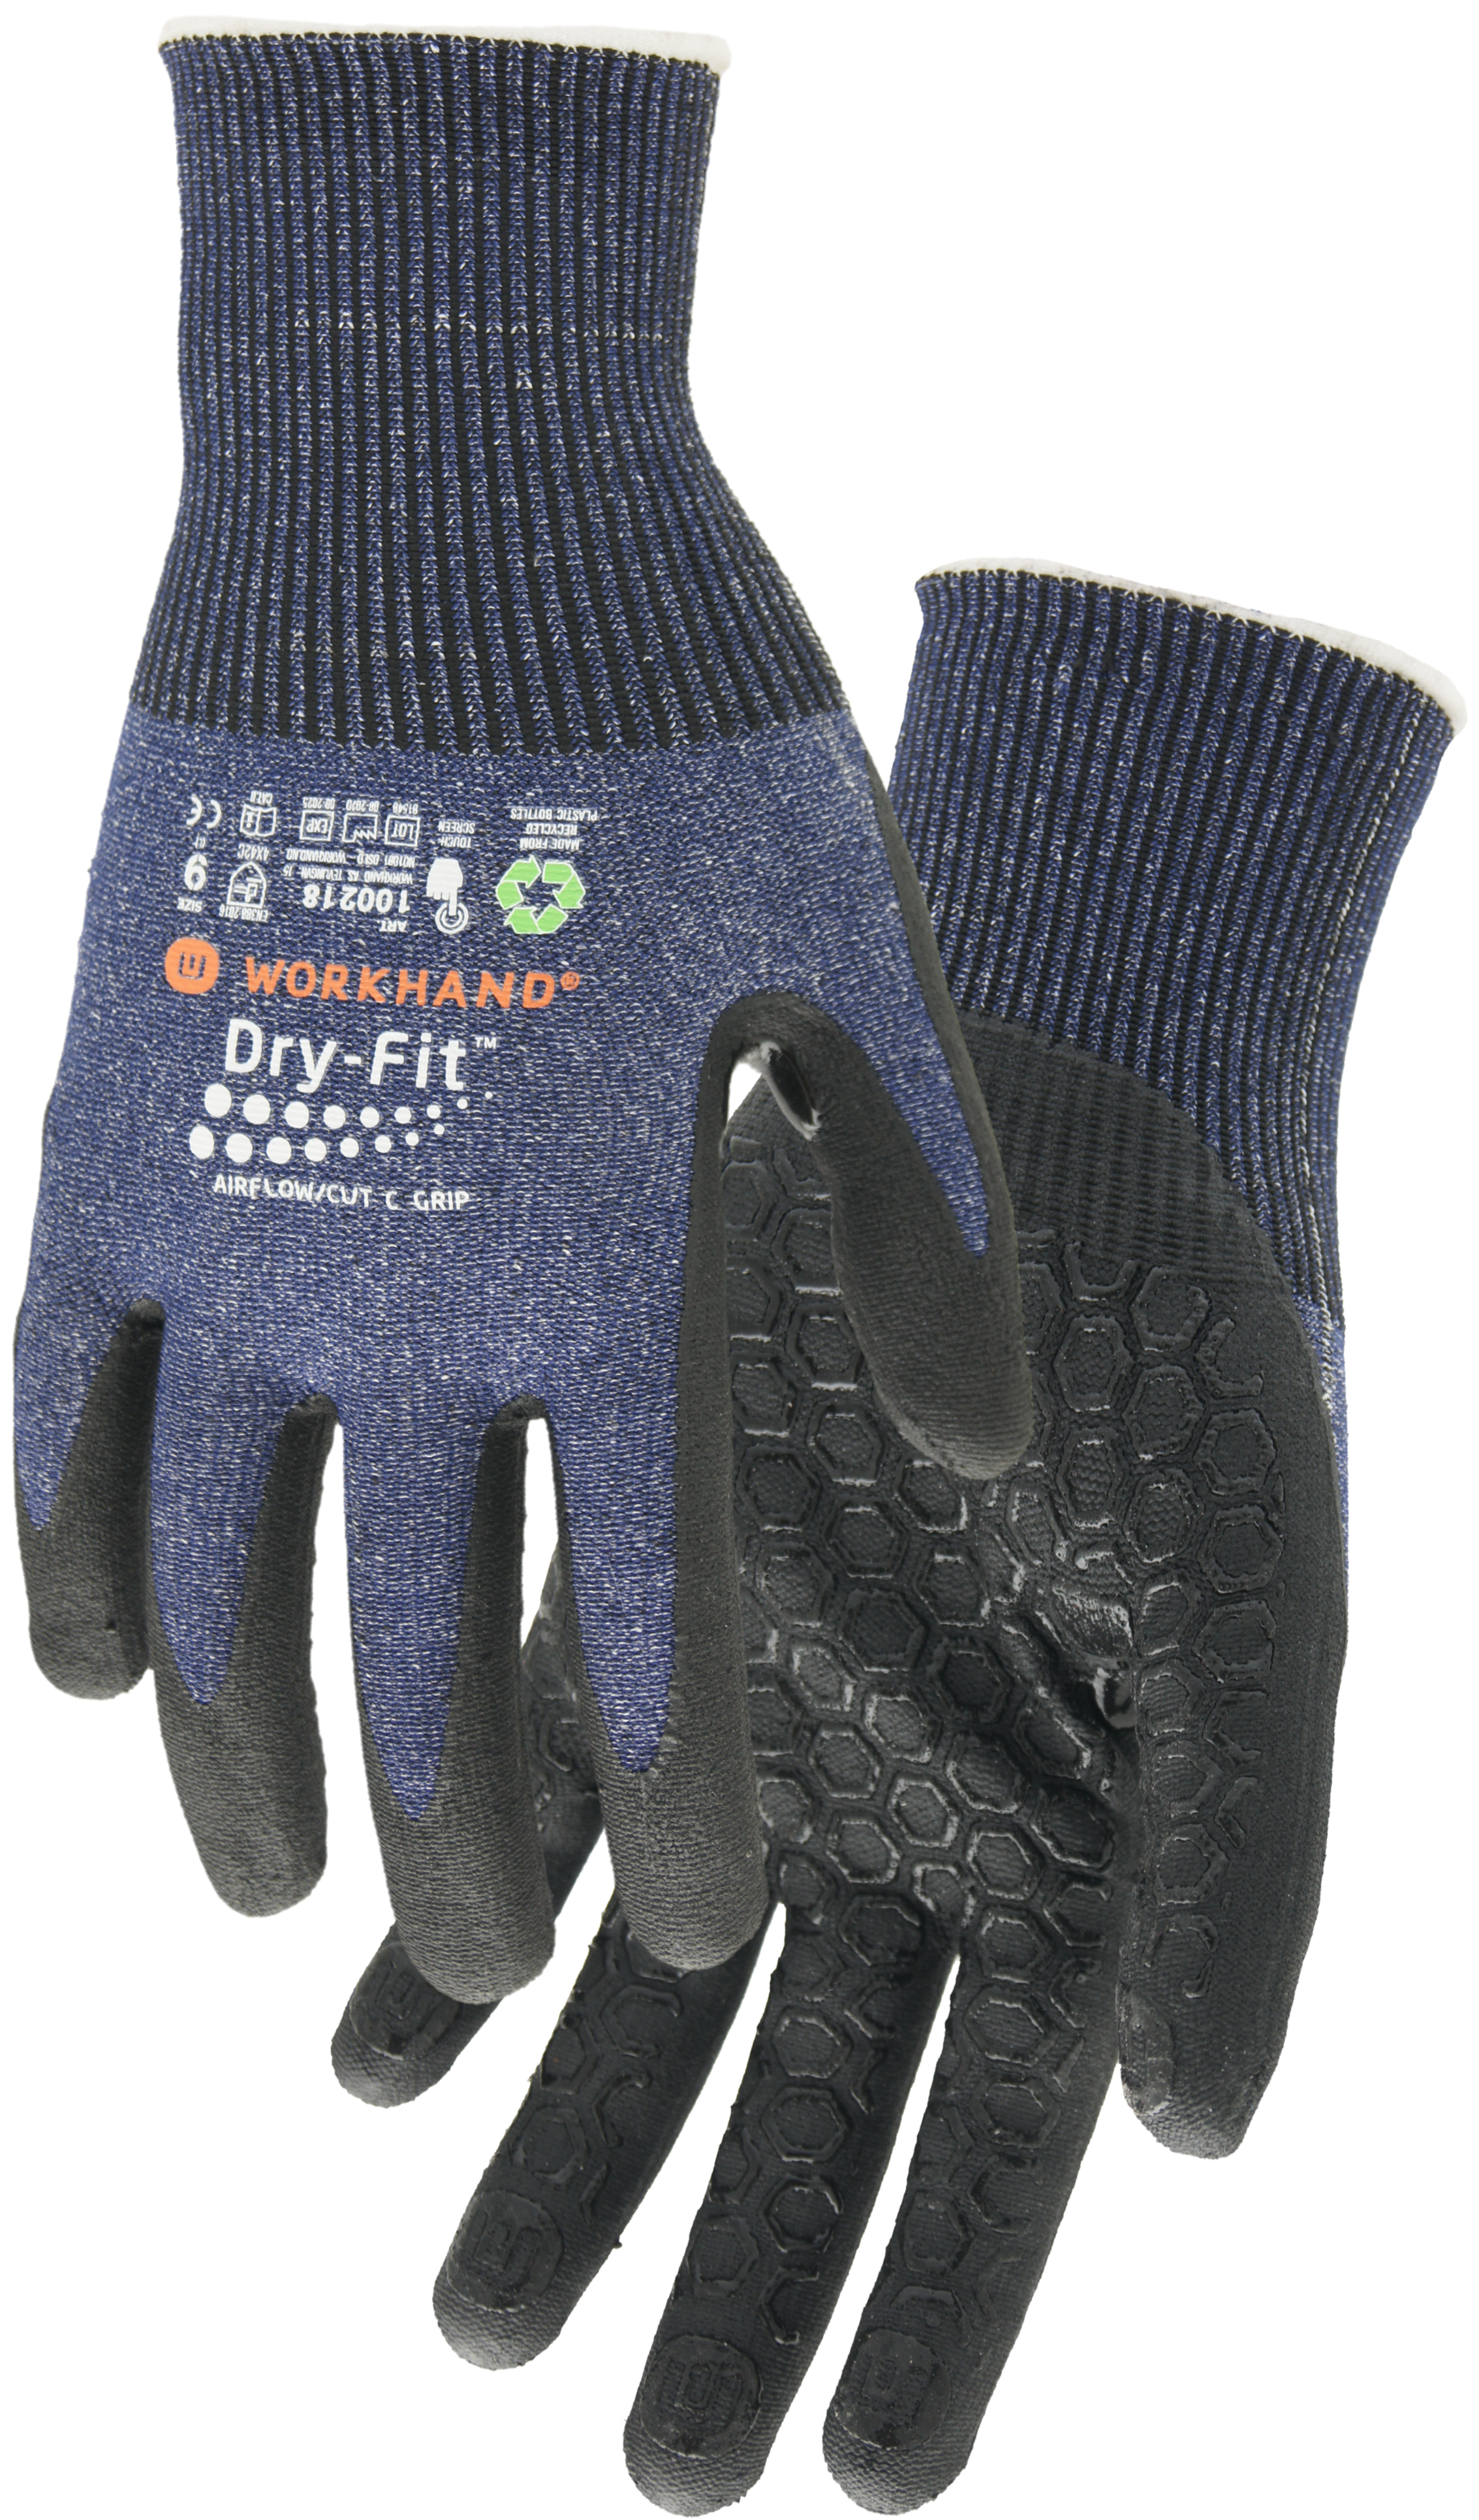 Workhand® Dry-Fit Airflow/Cut-C Grip (608981)